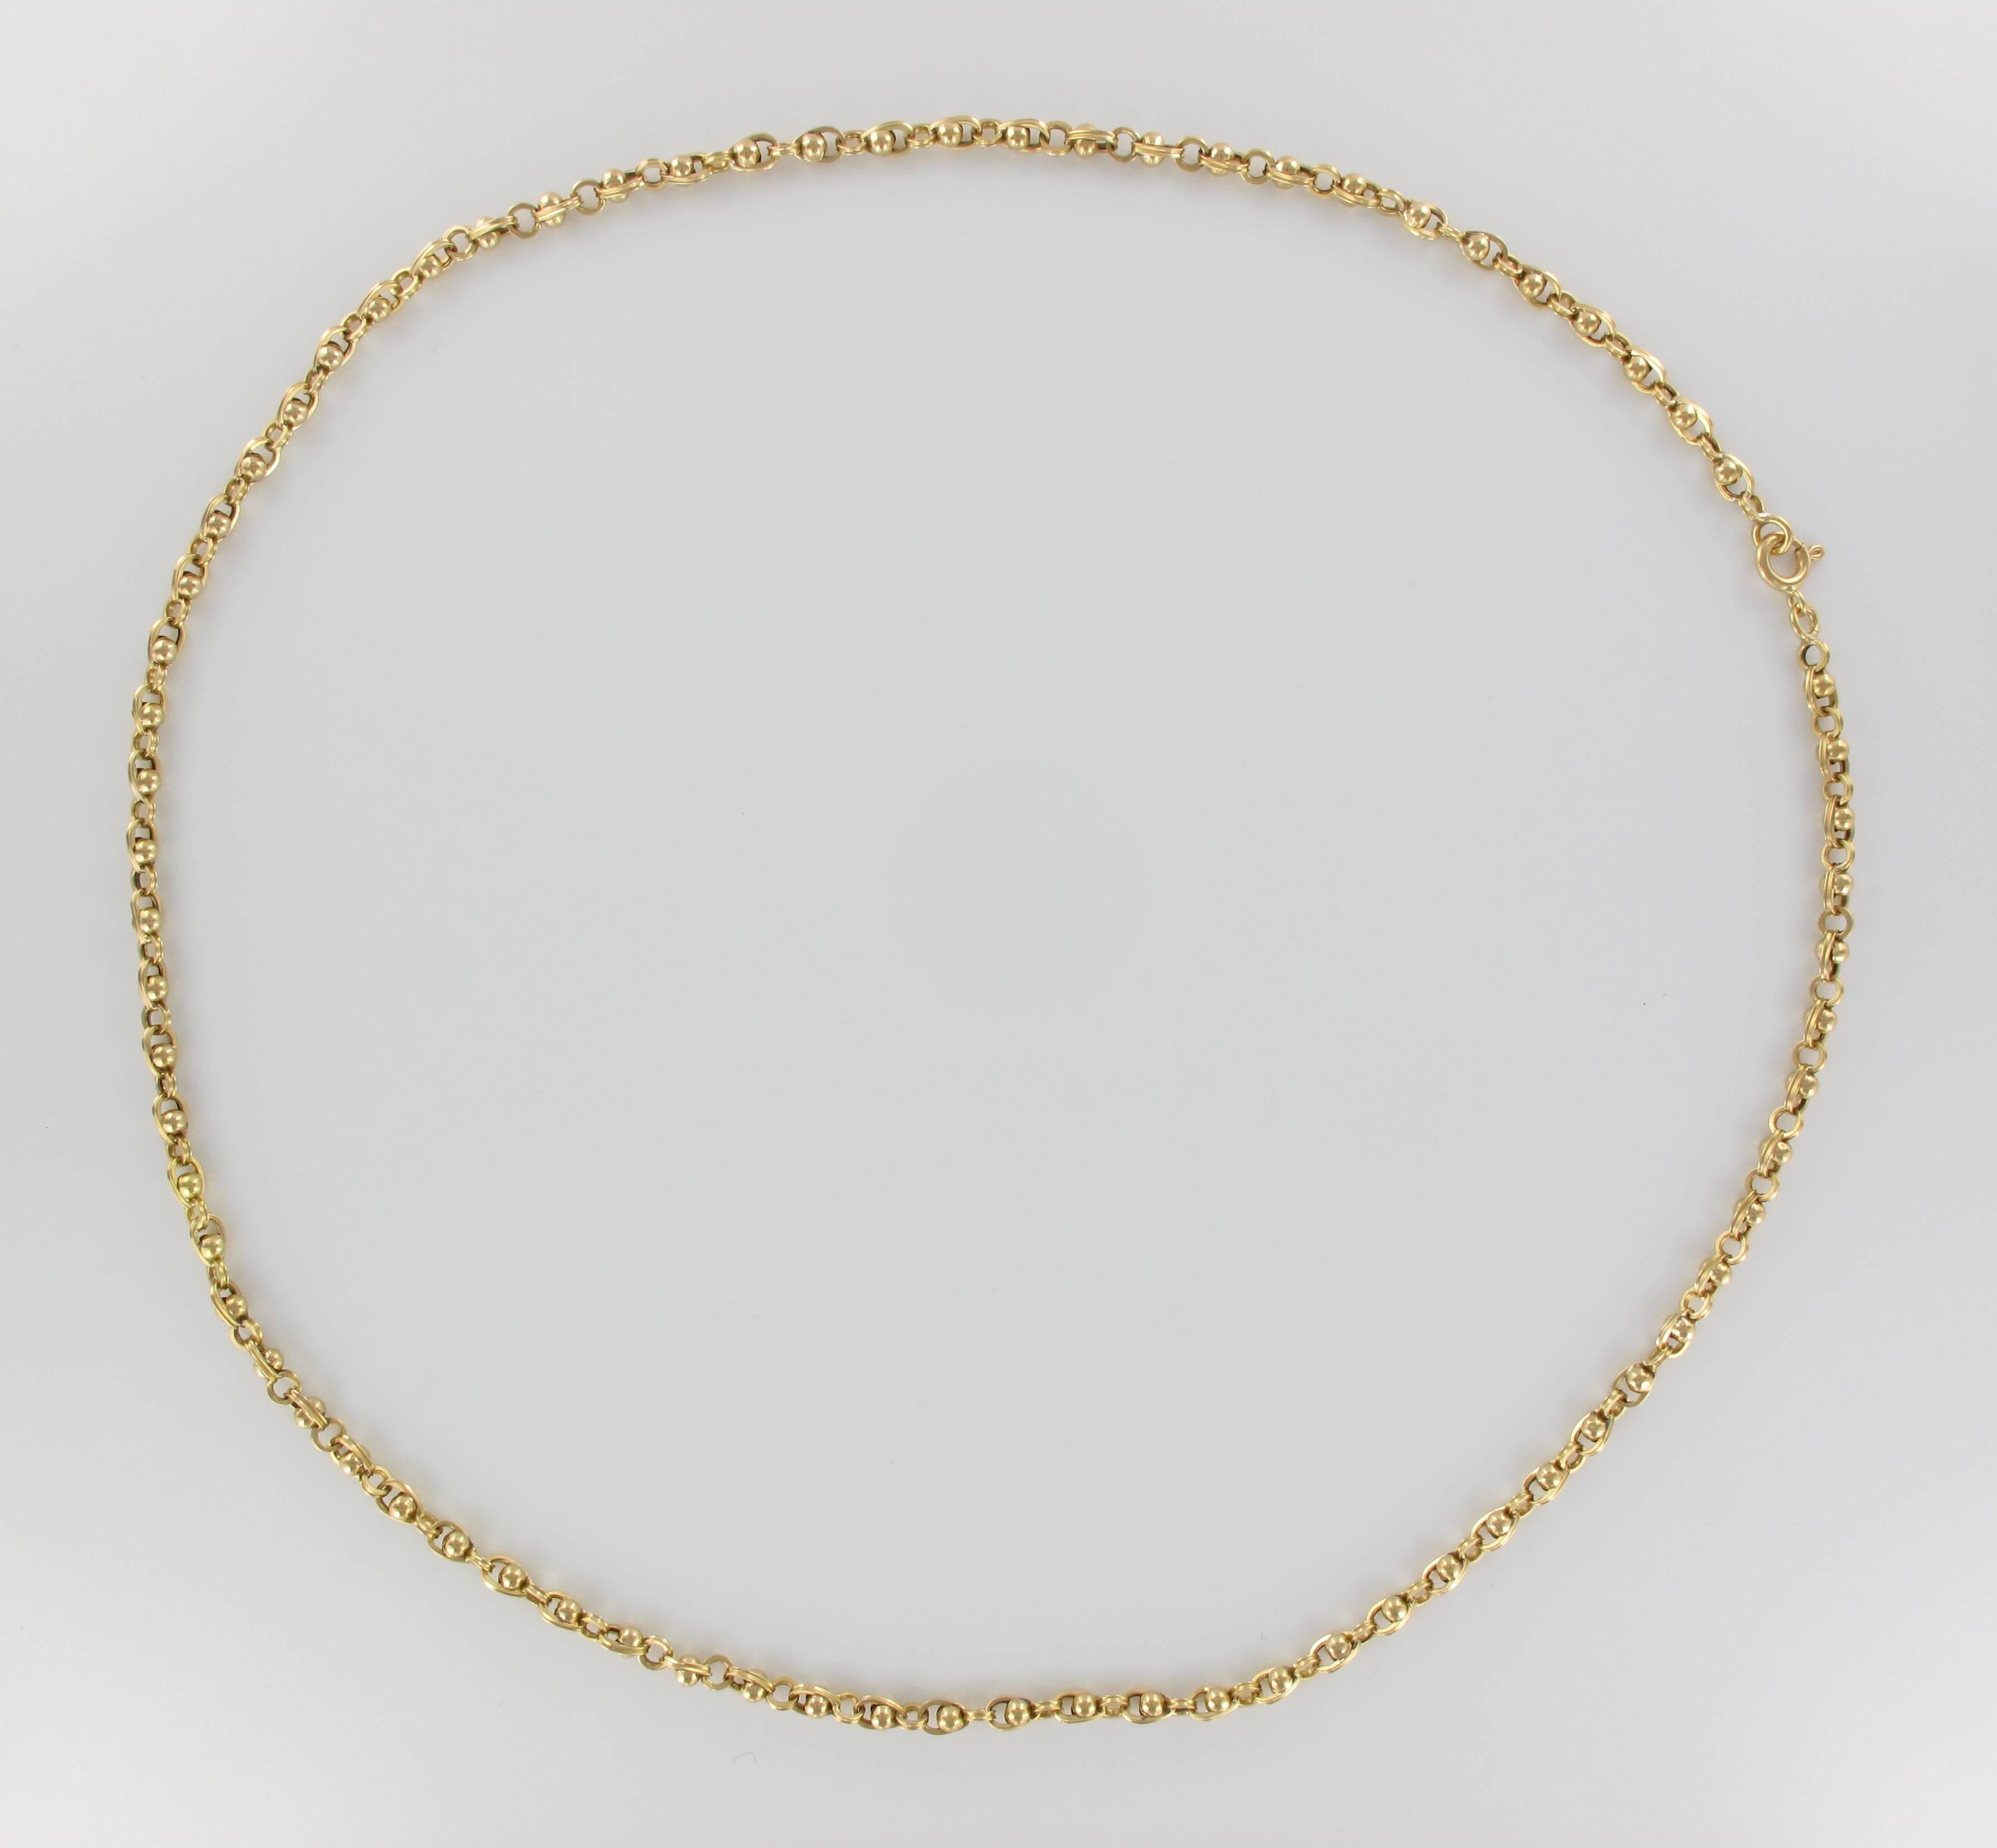 Women's French 18 Karat Yellow Gold Beads Chain Necklace